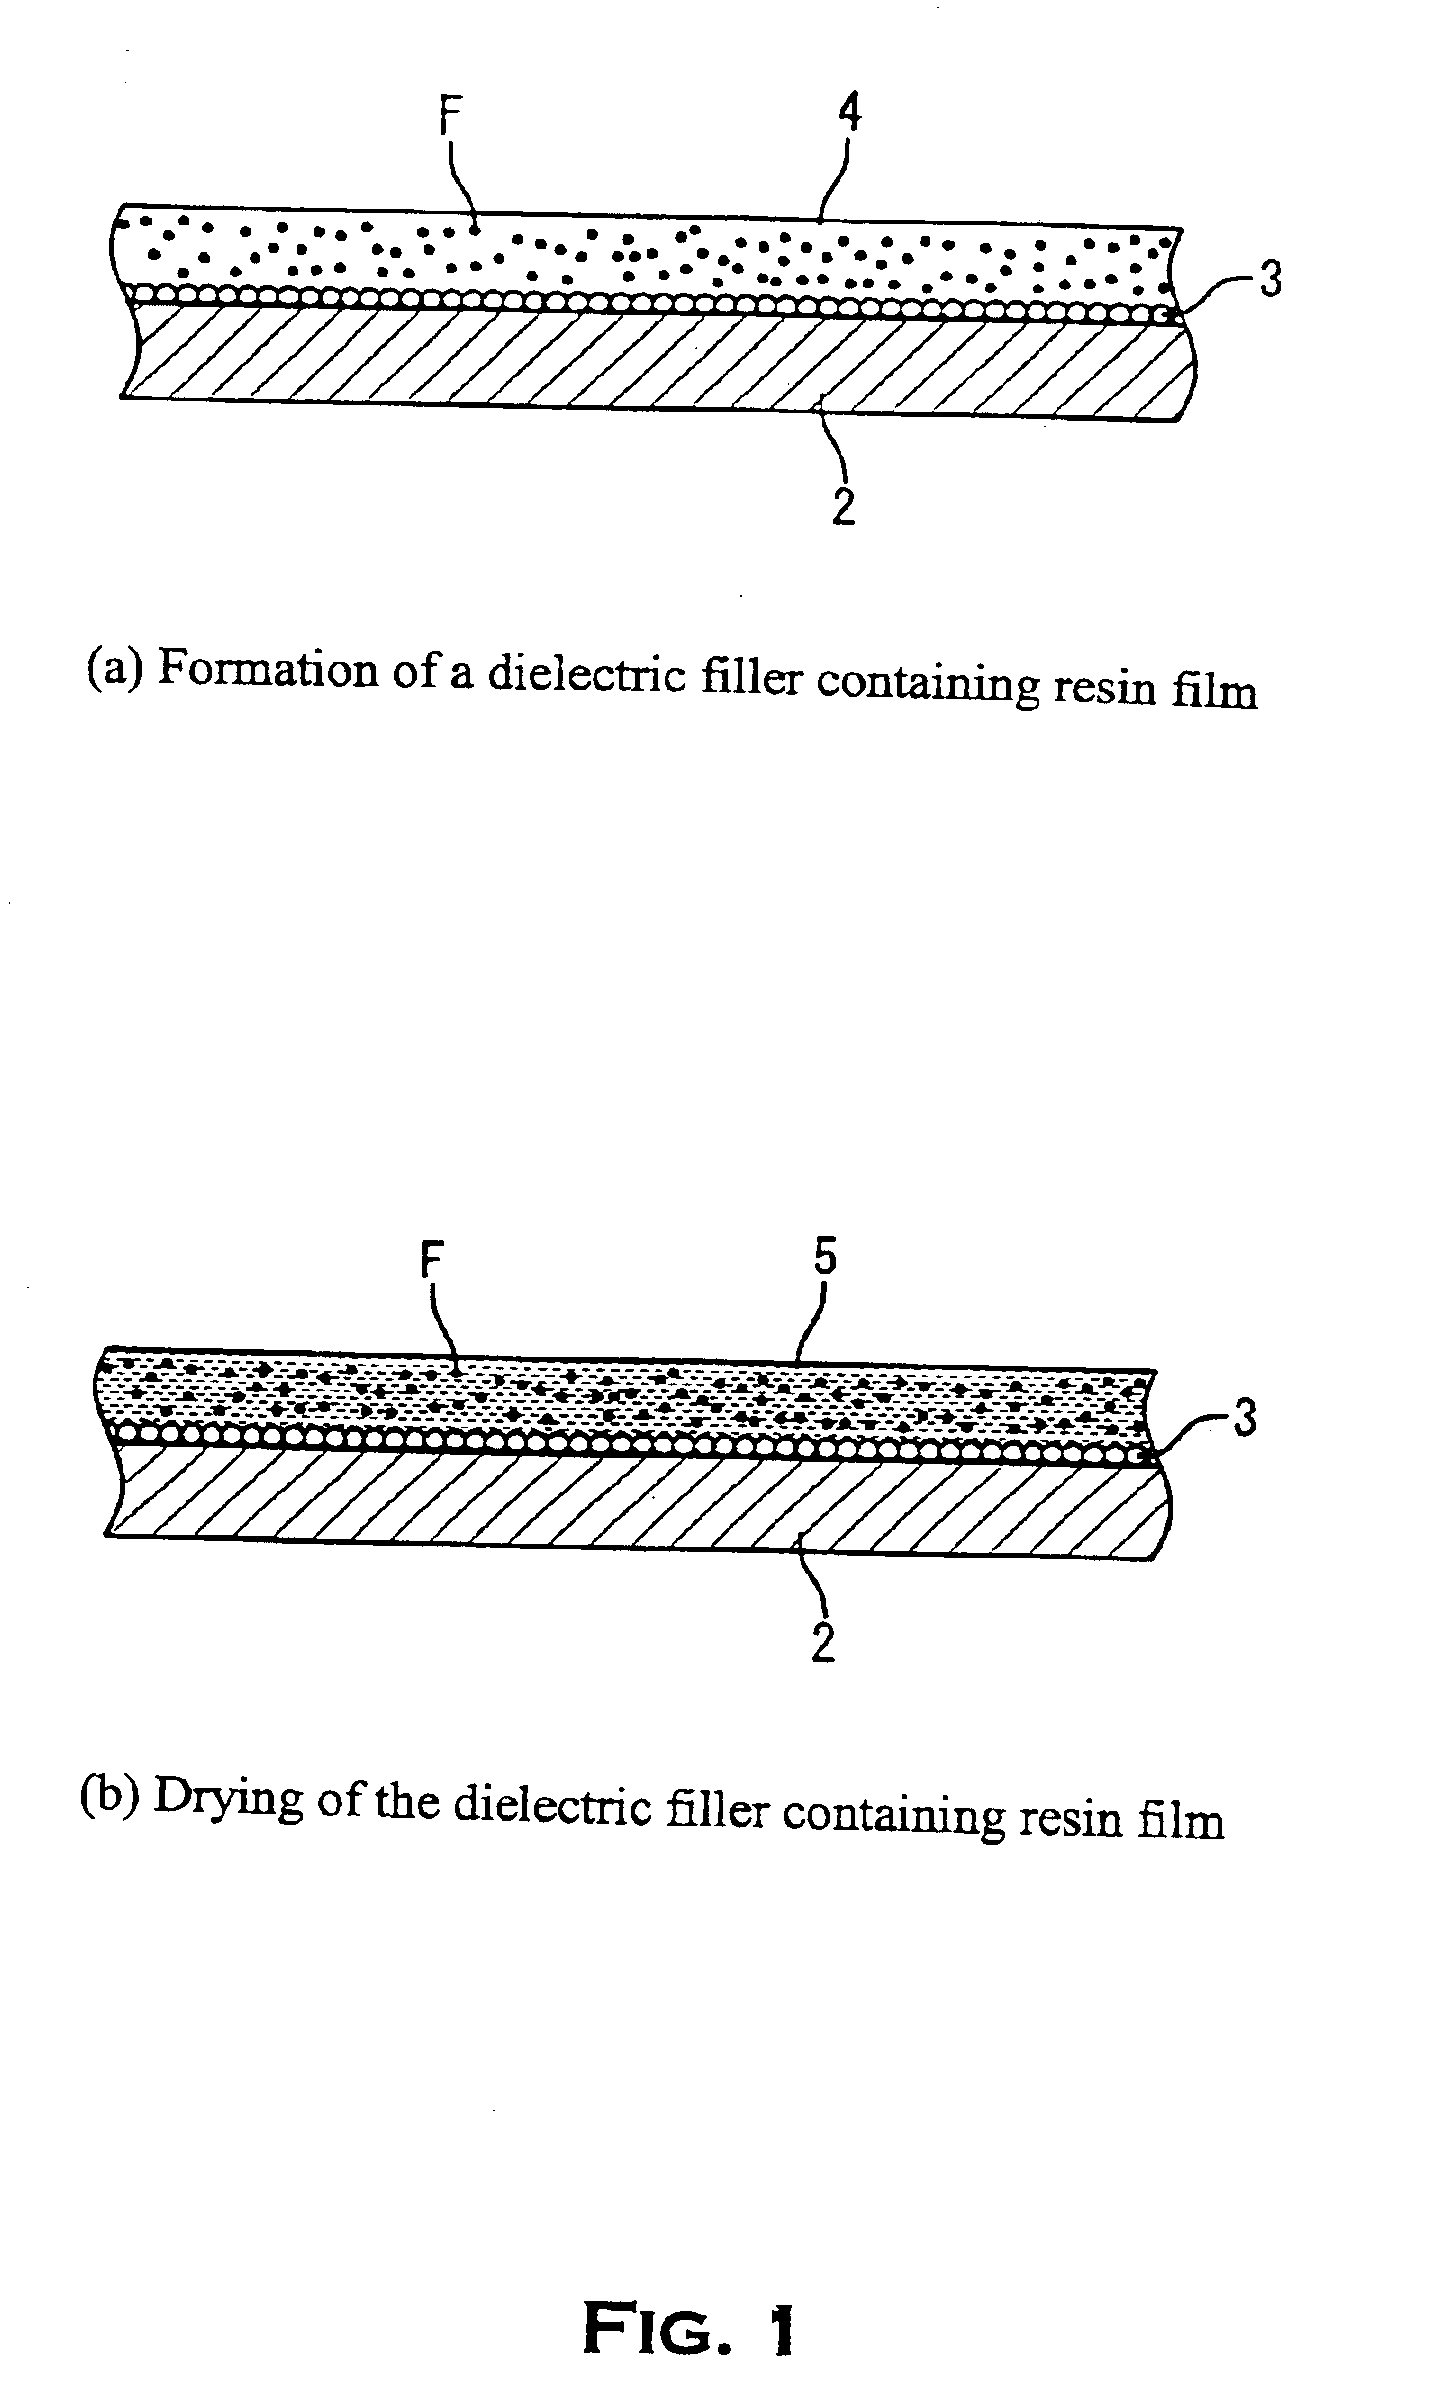 Dielectric filler containing resin for use in formation of built-in capacitor layer of printed wiring board and double-sided copper clad laminate with dielectric layer formed using the same dielectric filler containing resin, and production method of double-sided copper clad laminate